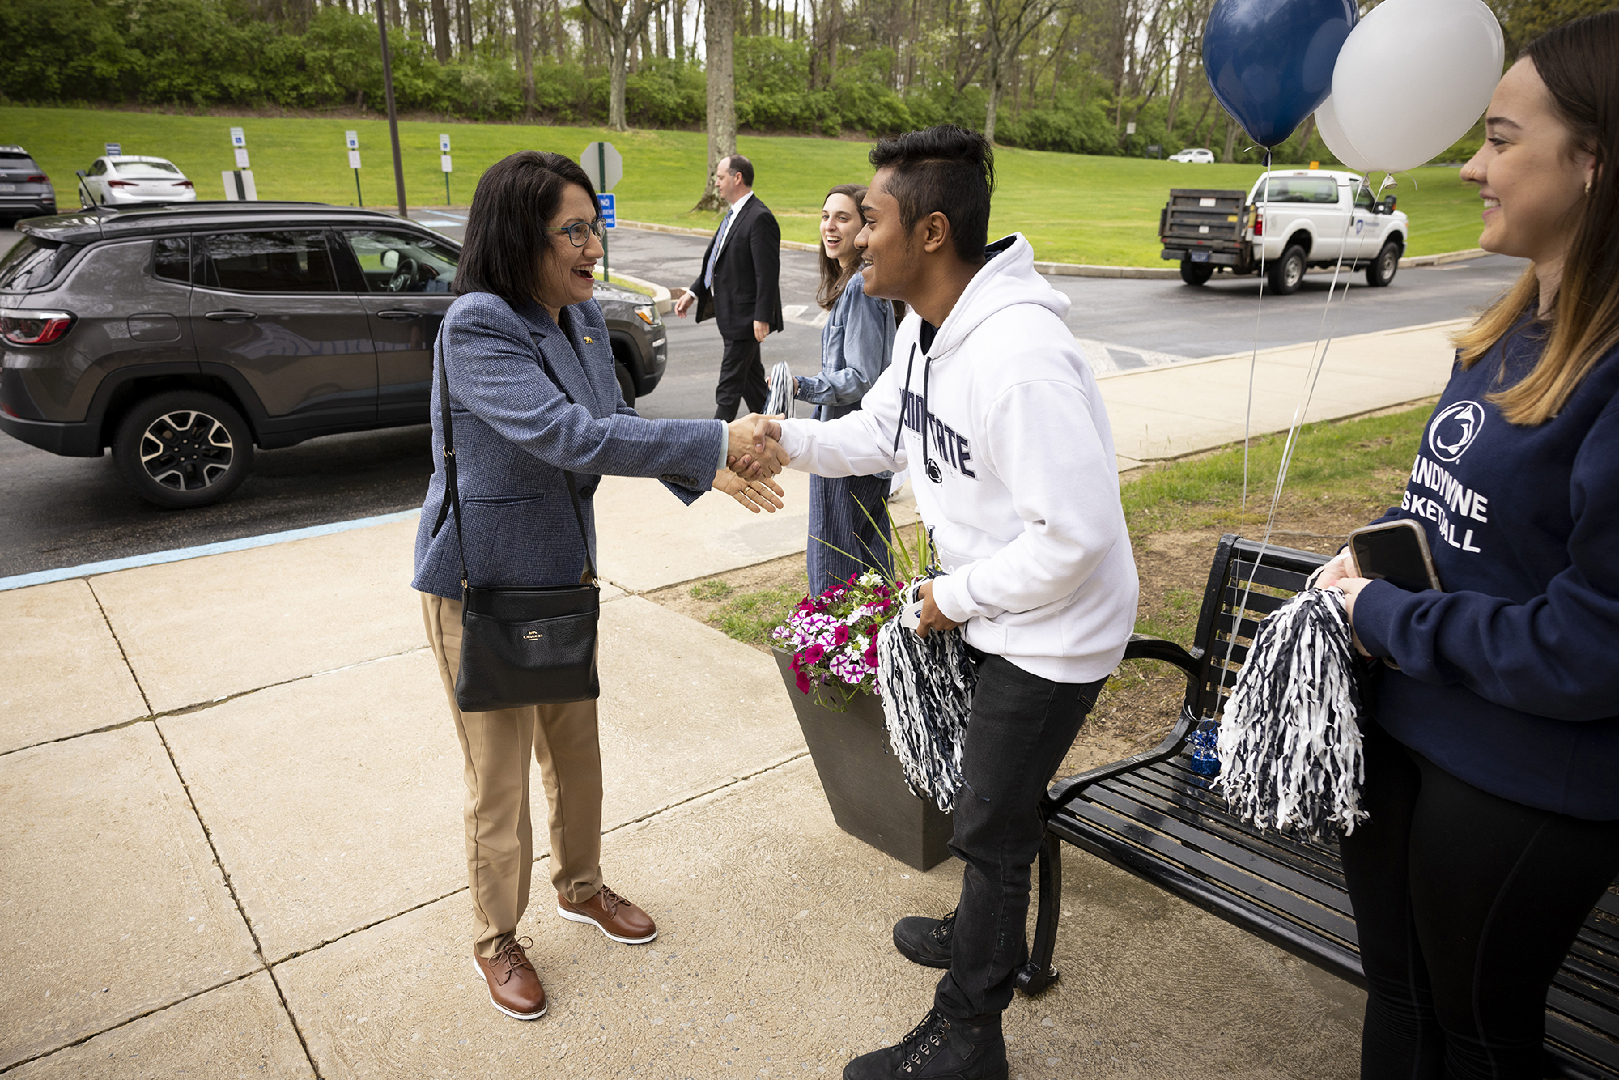 A woman shakes the hand of a male student.